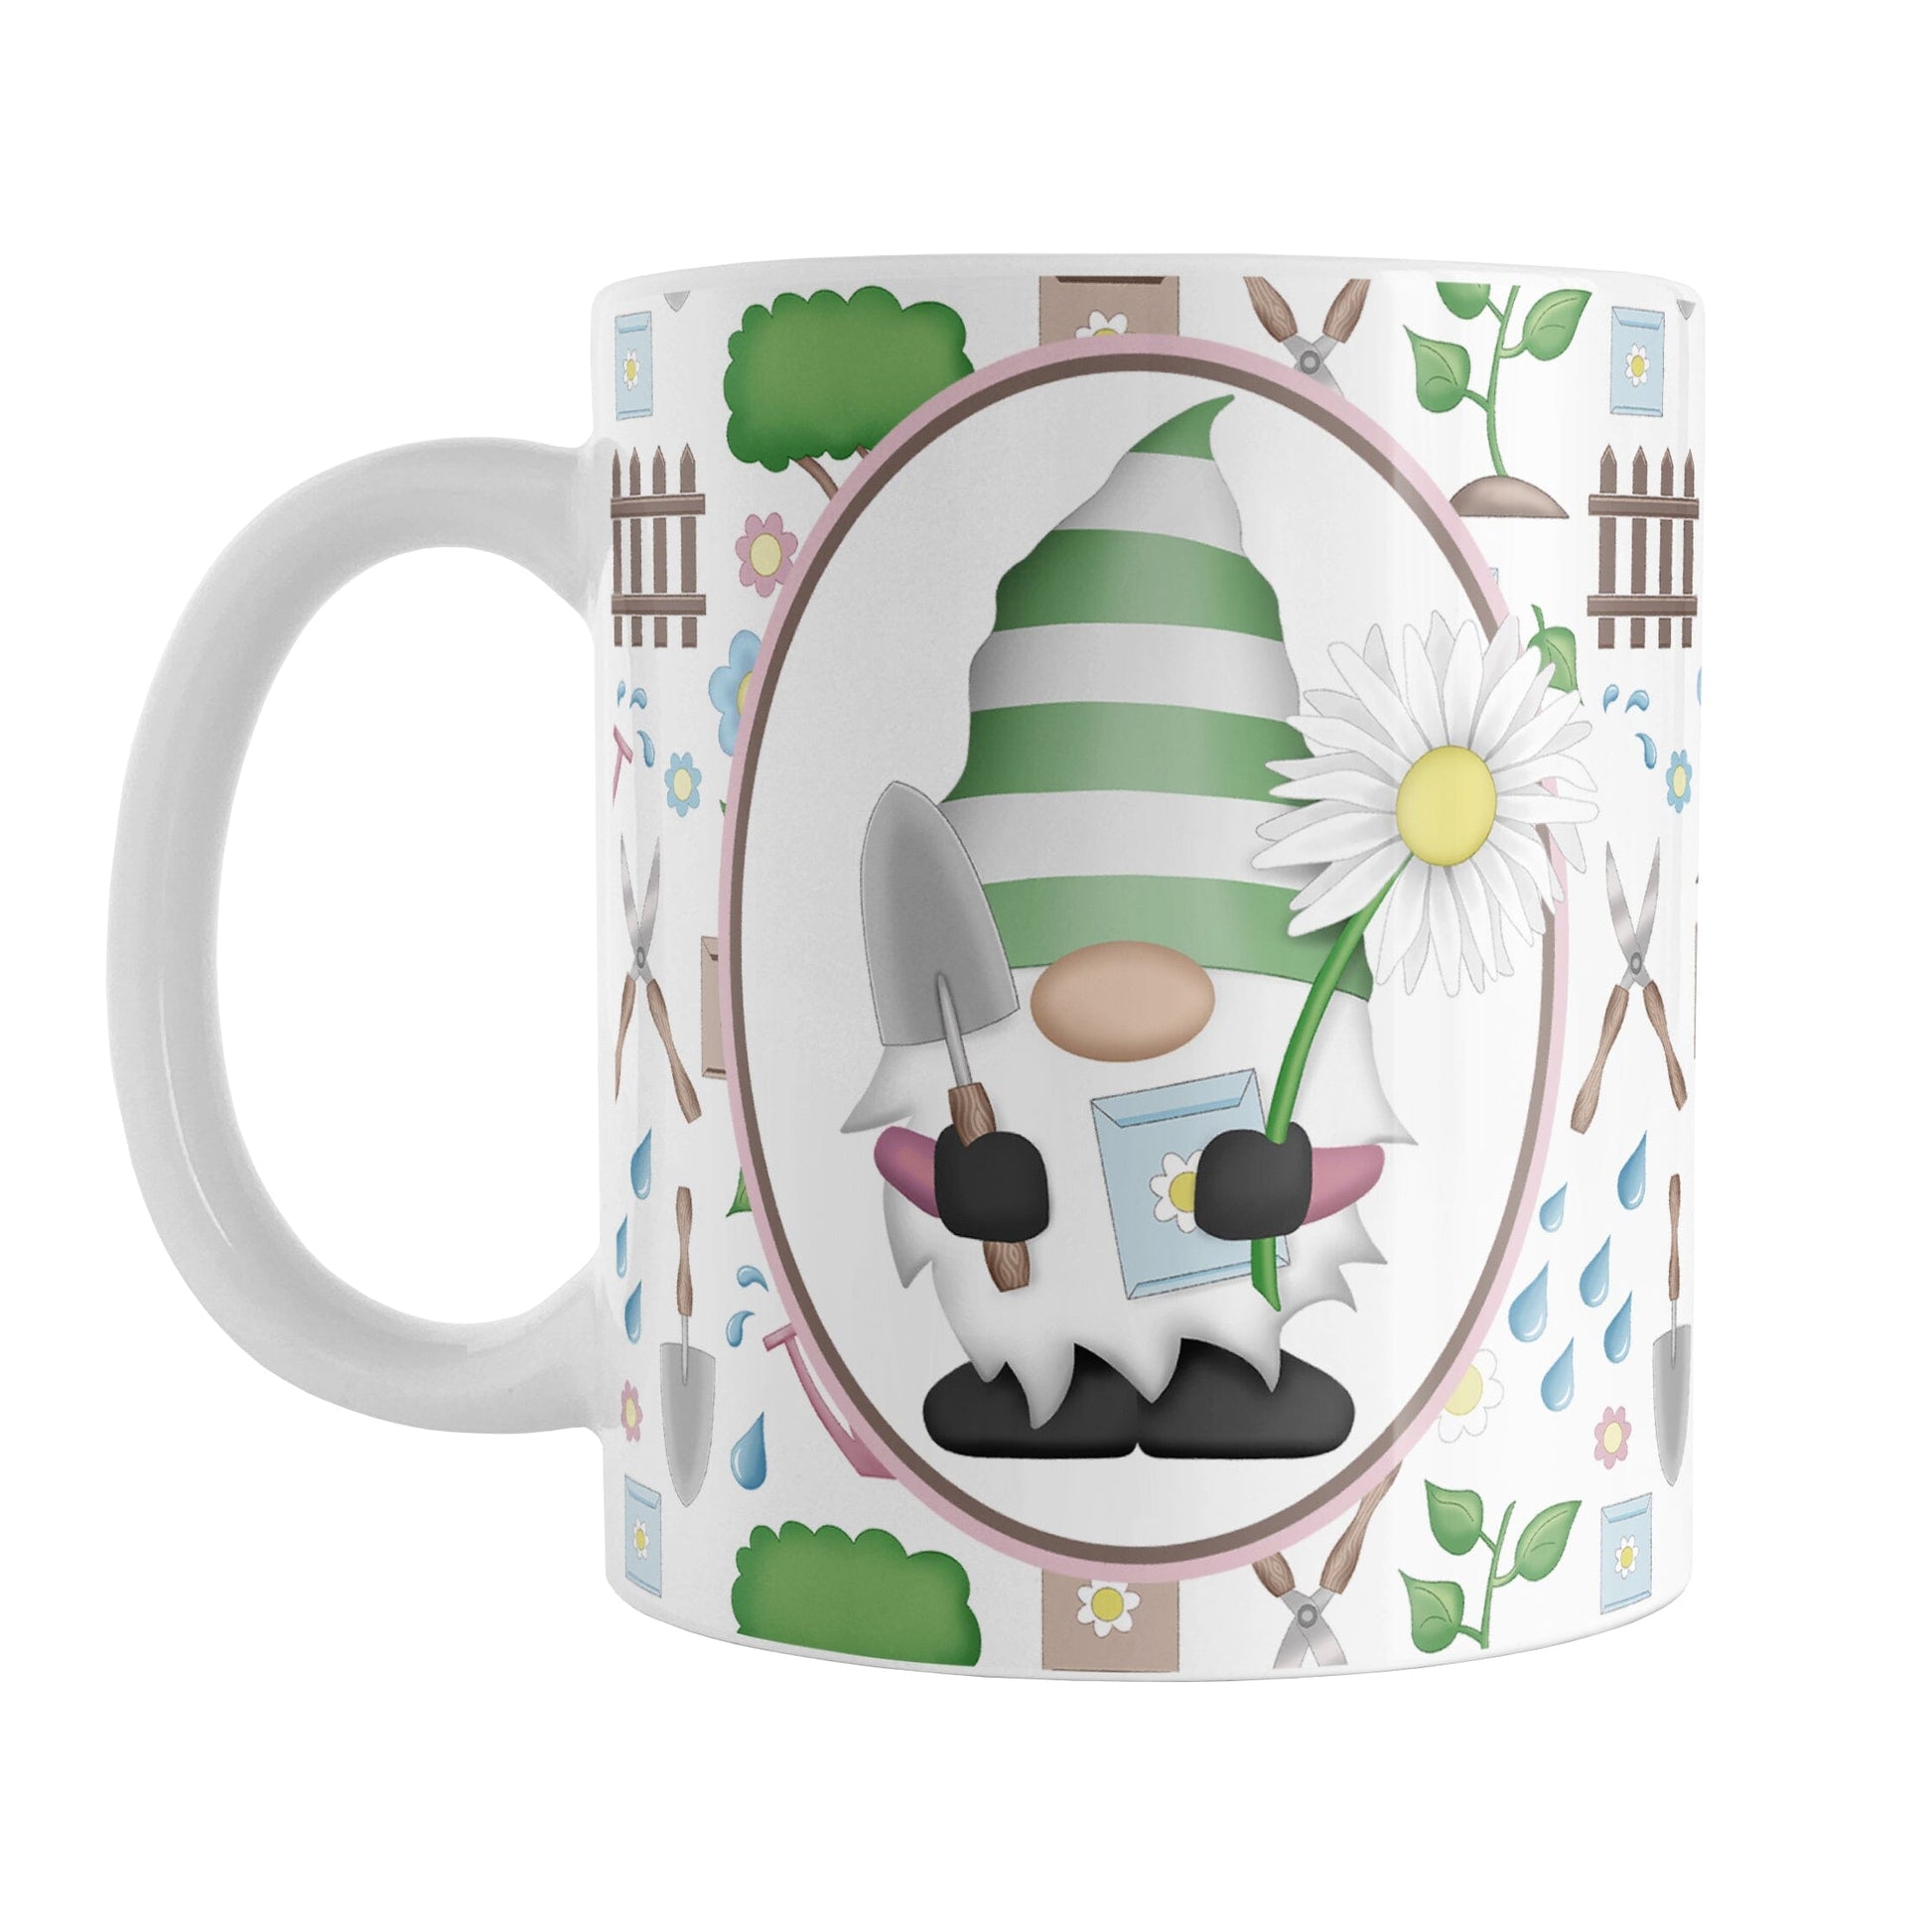 Spring Gnome Gardening Pattern Mug (11oz) at Amy's Coffee Mugs. A ceramic coffee mug designed with an adorable spring gardening gnome holding  an oversized daisy in a white oval over a springtime gardening pattern with trees, plants, flowers, seed packets, watering cans, fences, and gardening tools in spring colors such as pink, blue, green, and brown. 